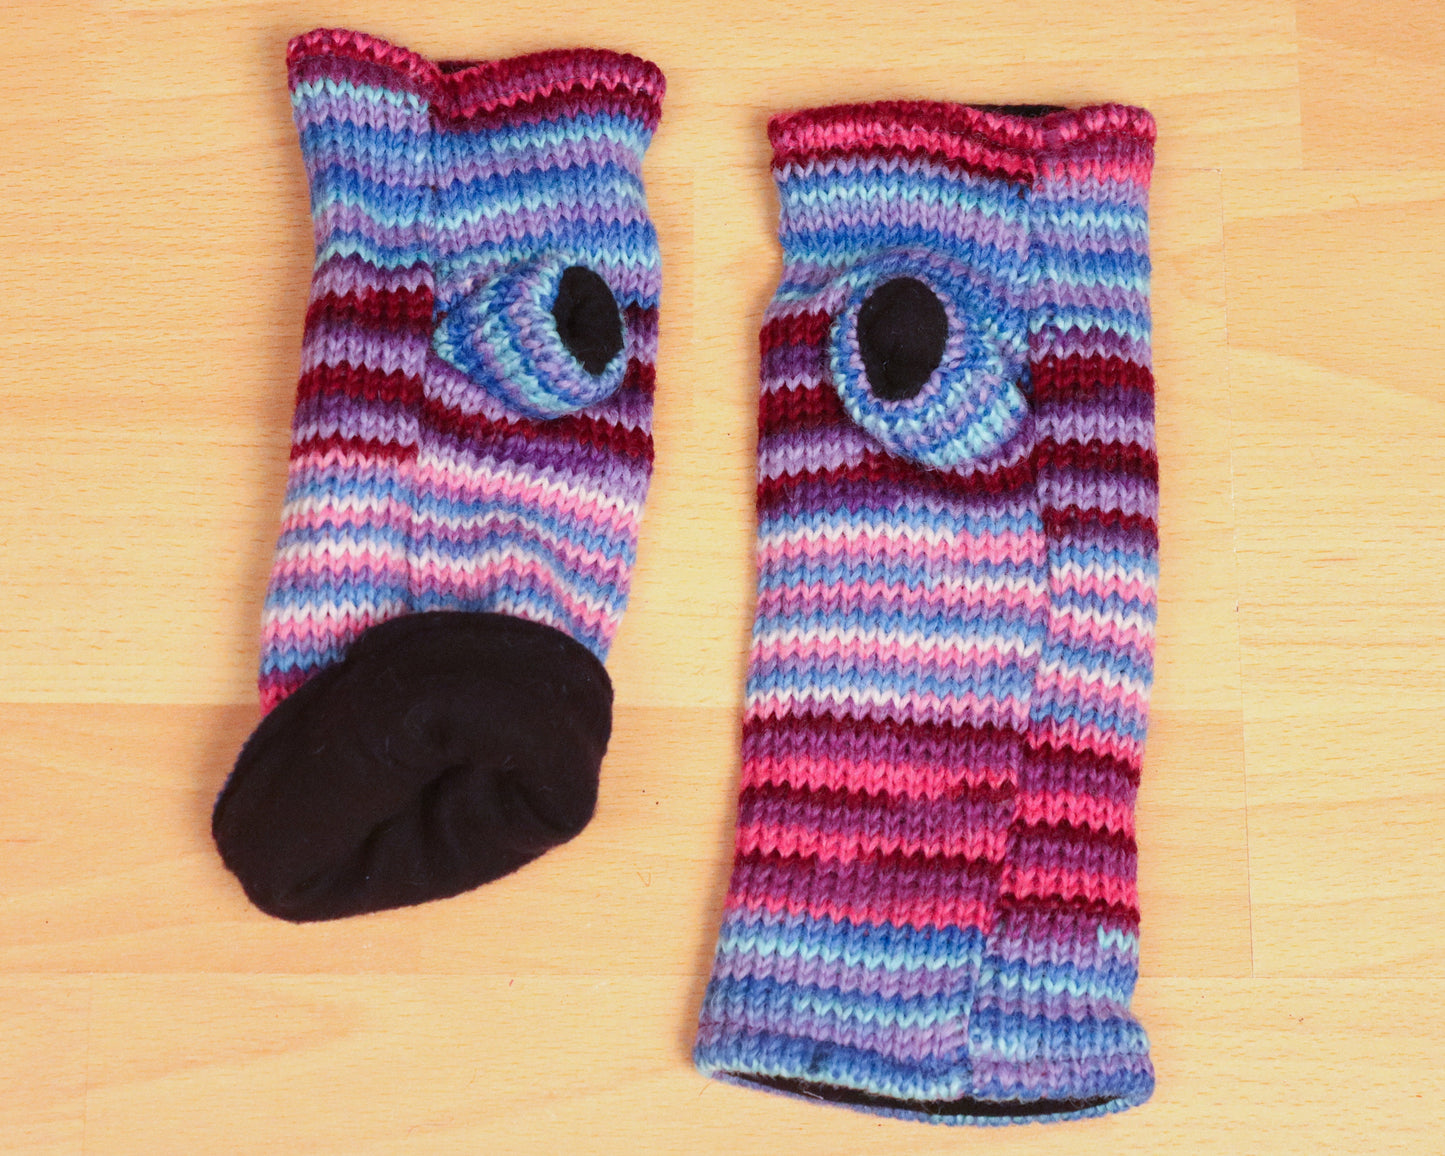 Fleece Lined Knitted Wrist Warmers - Blue Purple and Pink Striped